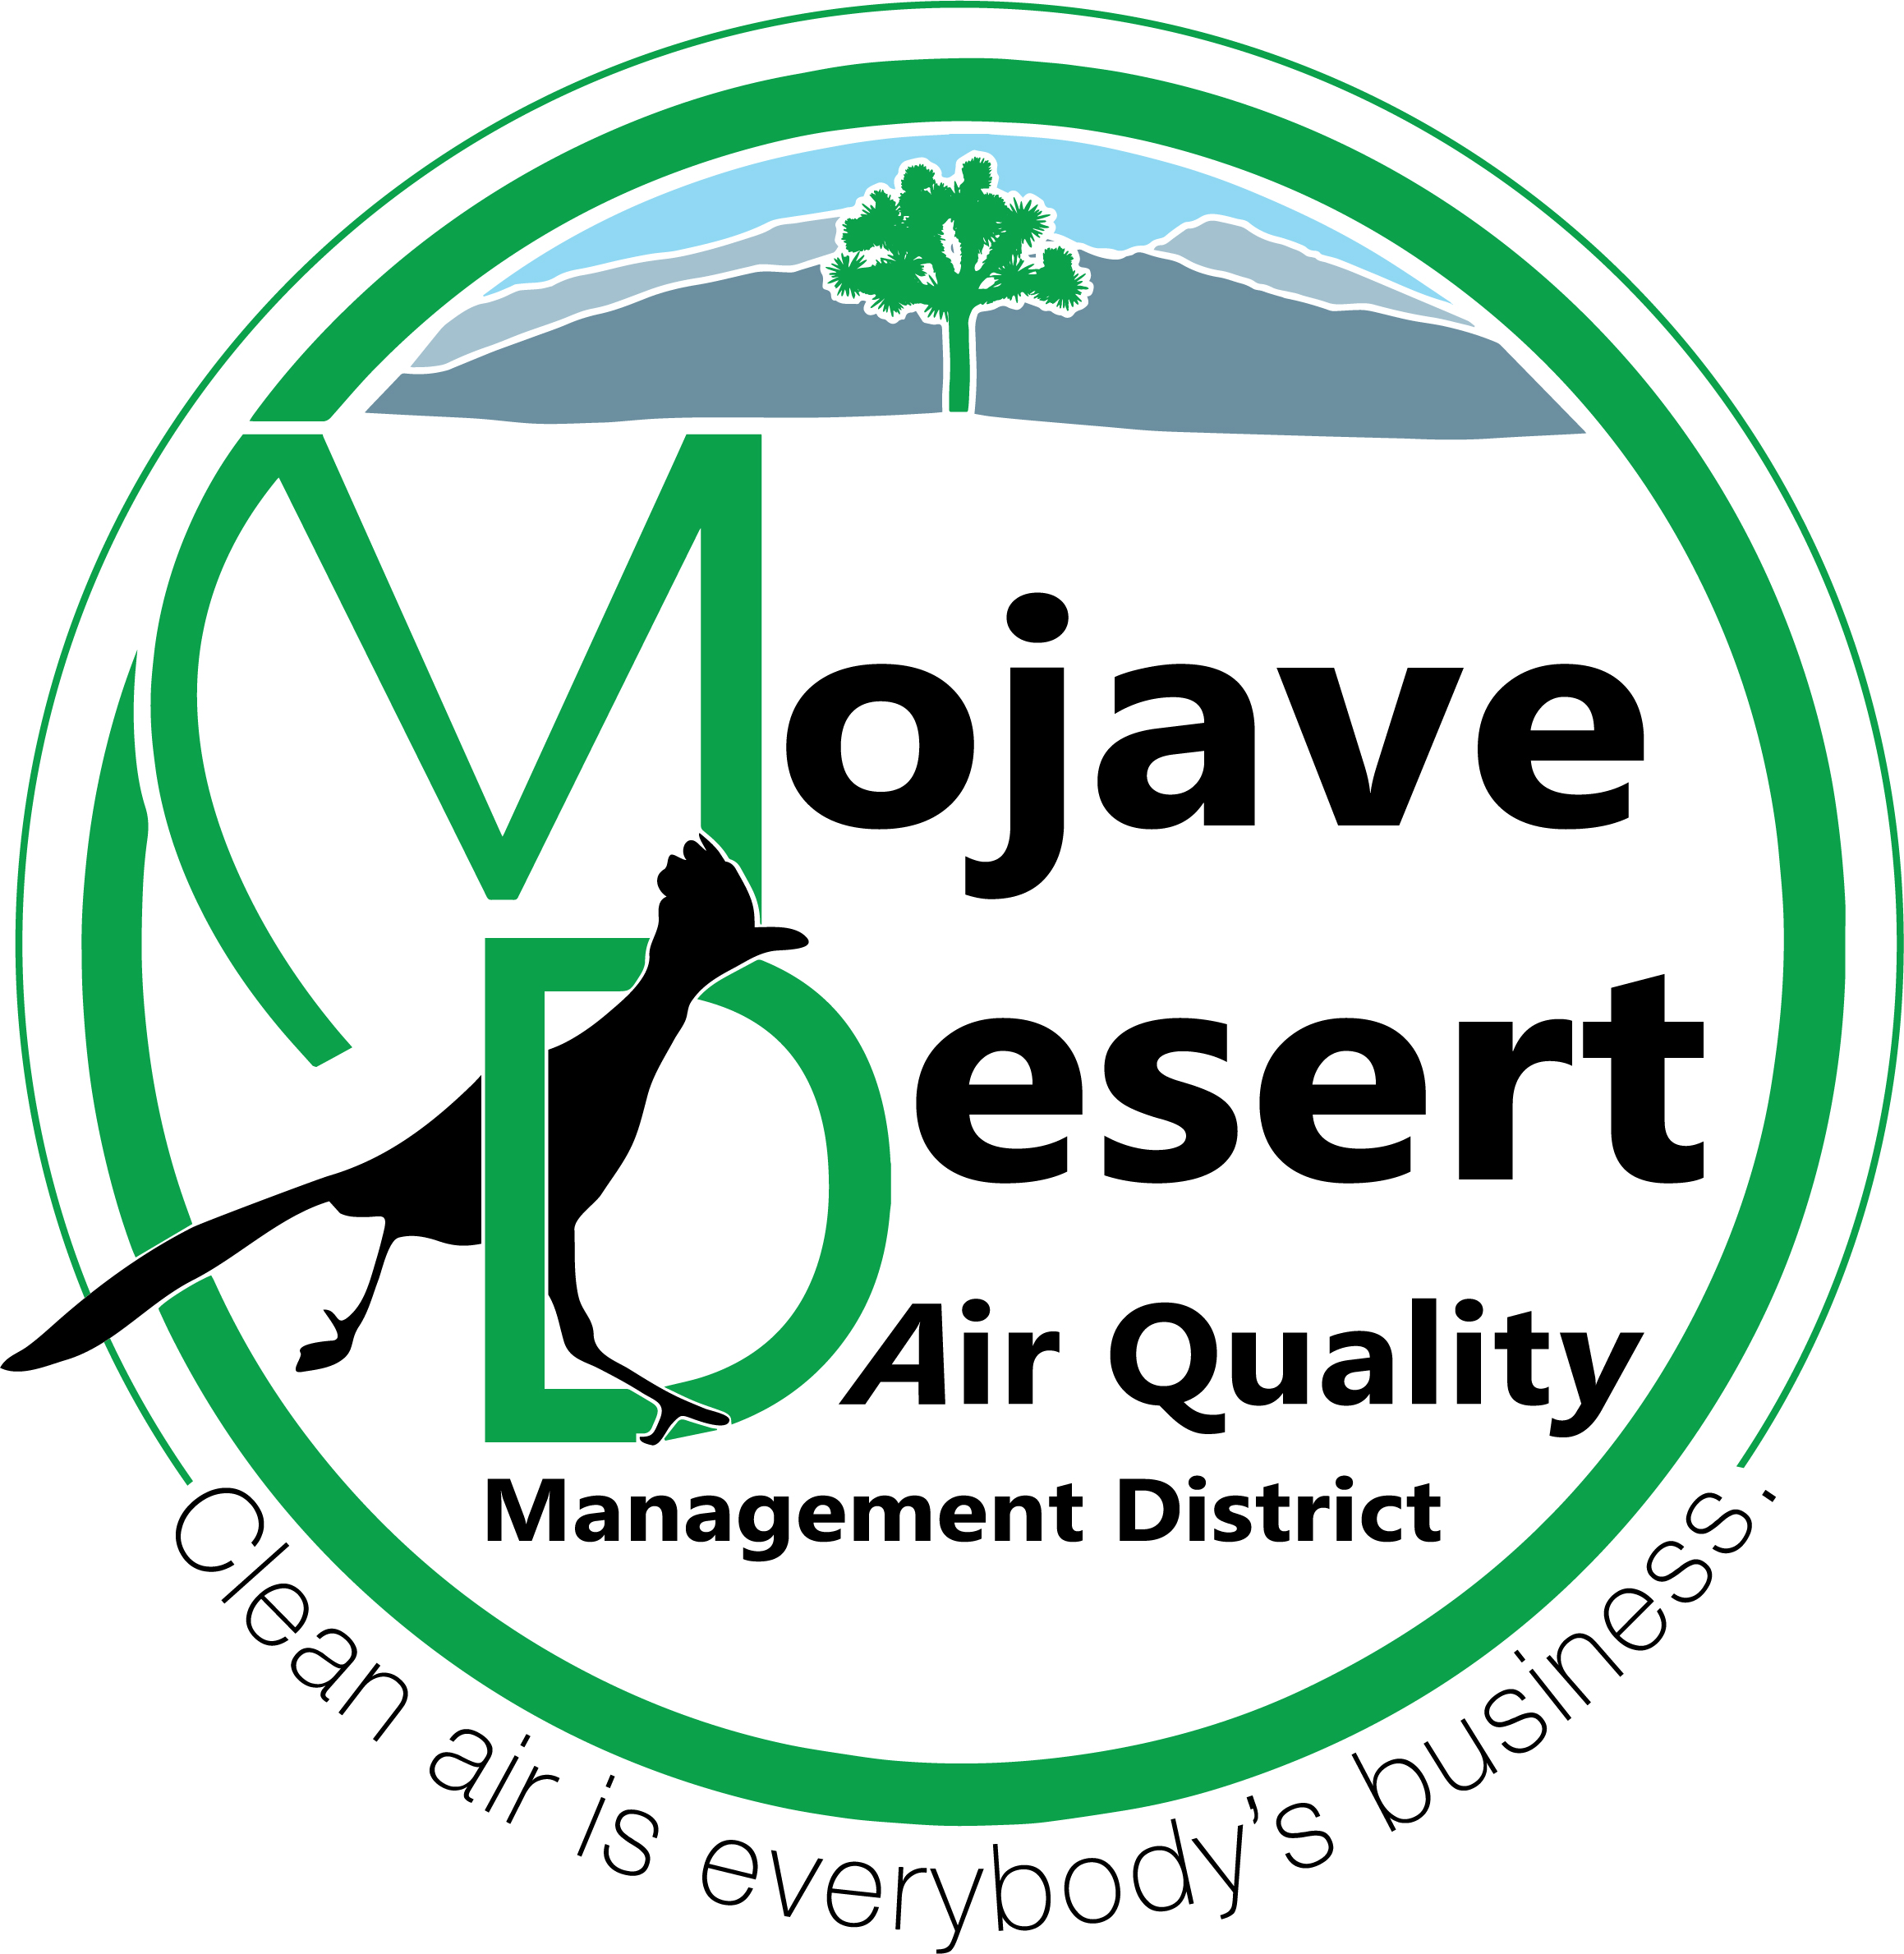 Mojave Desert Air Quality Management District appoints Robert Lovingood as Member At Large for a 2-year appointment, nominated by unanimous vote.